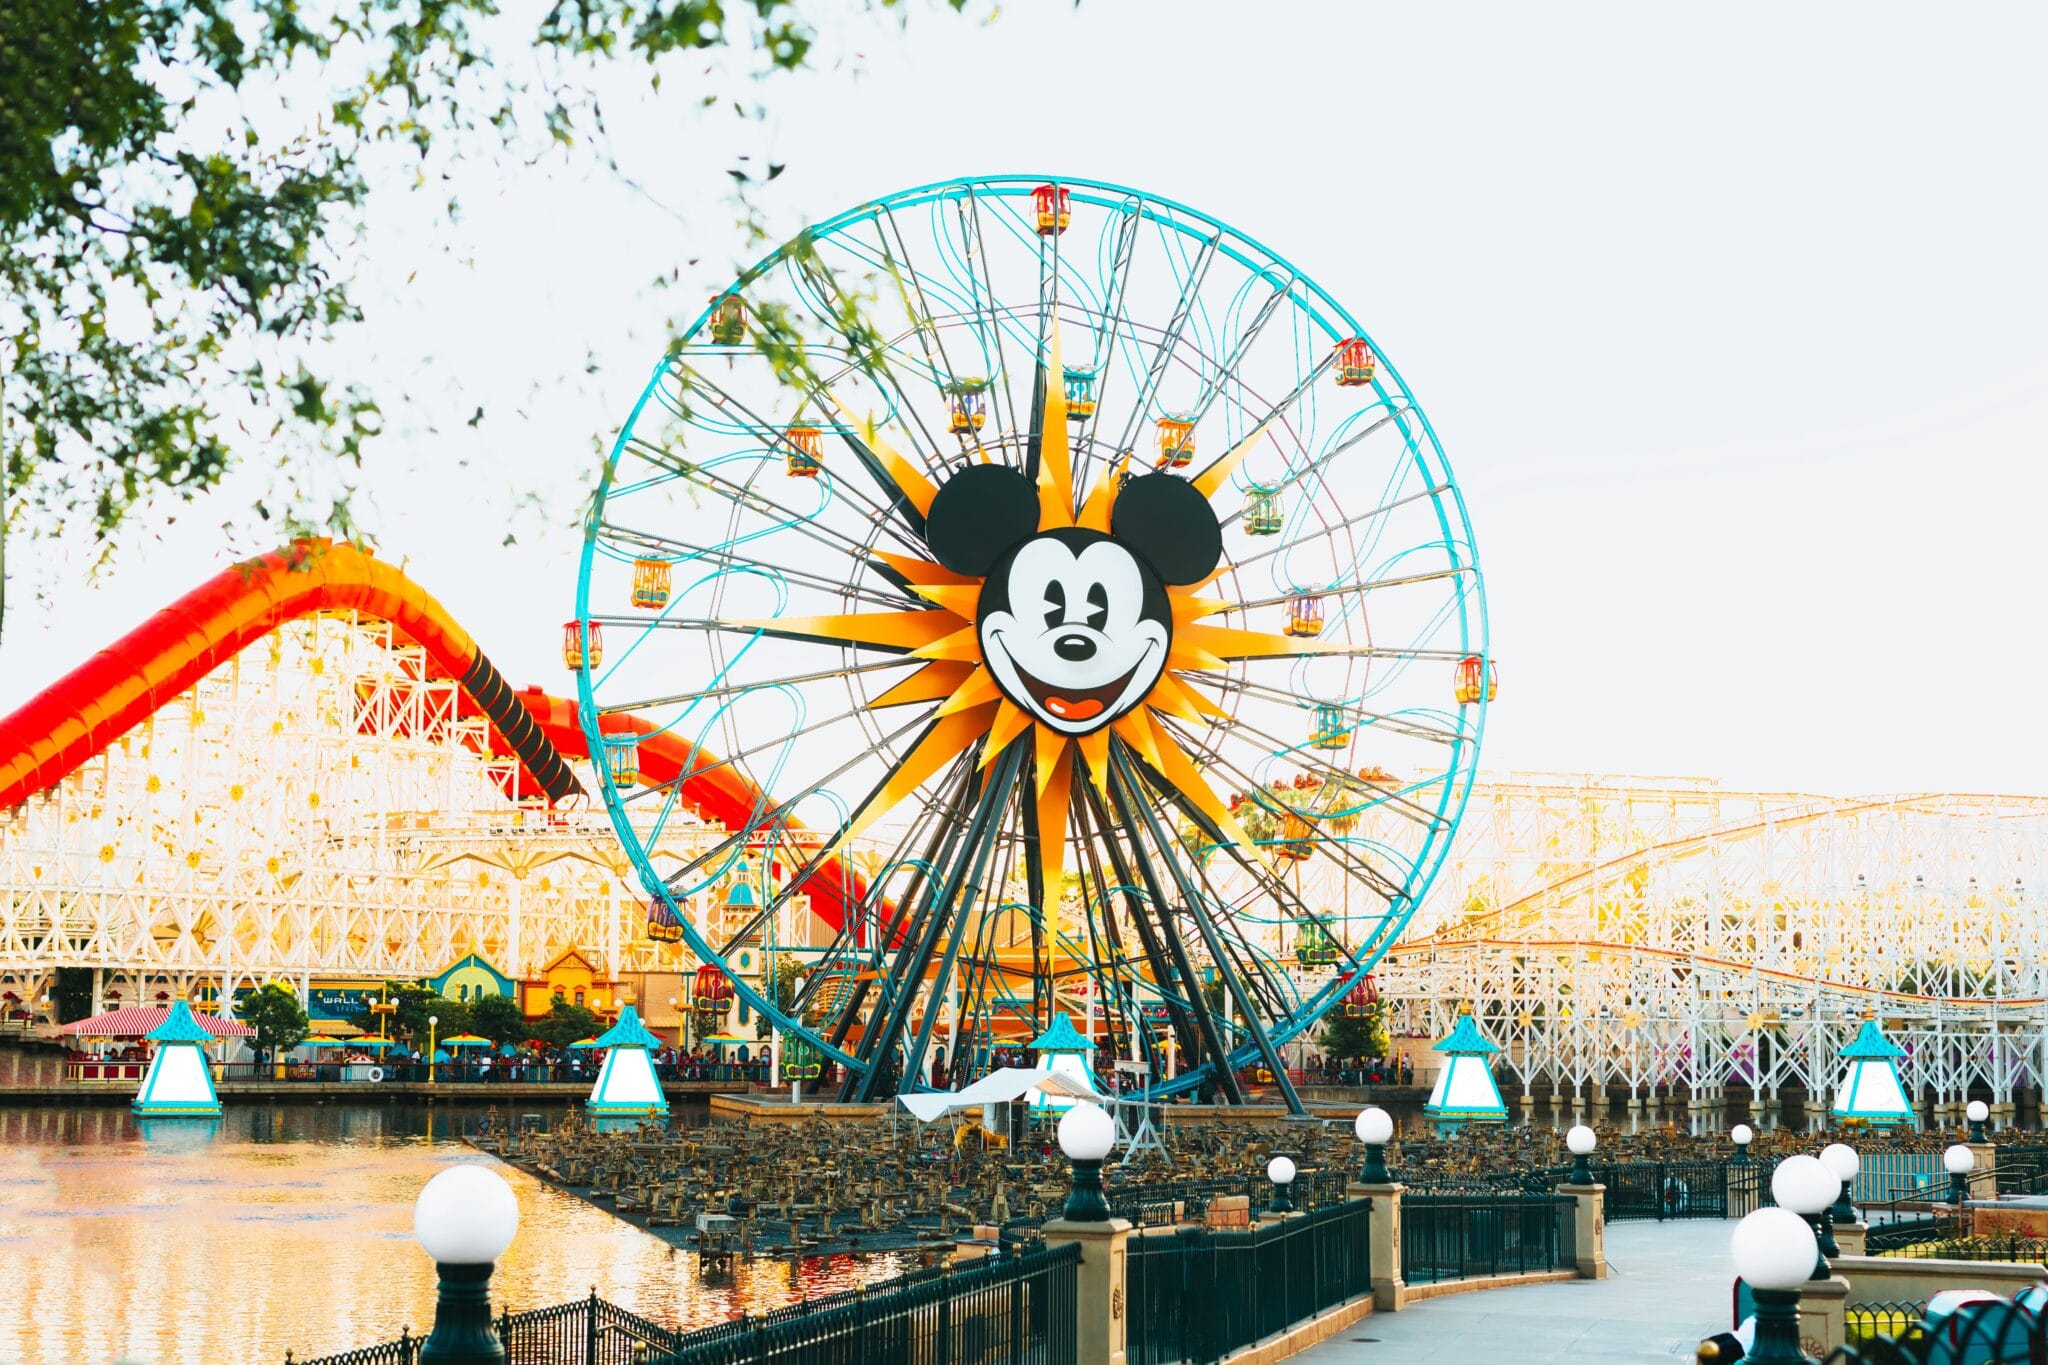 A ferris wheel with mickey mouse on it - Disneyland